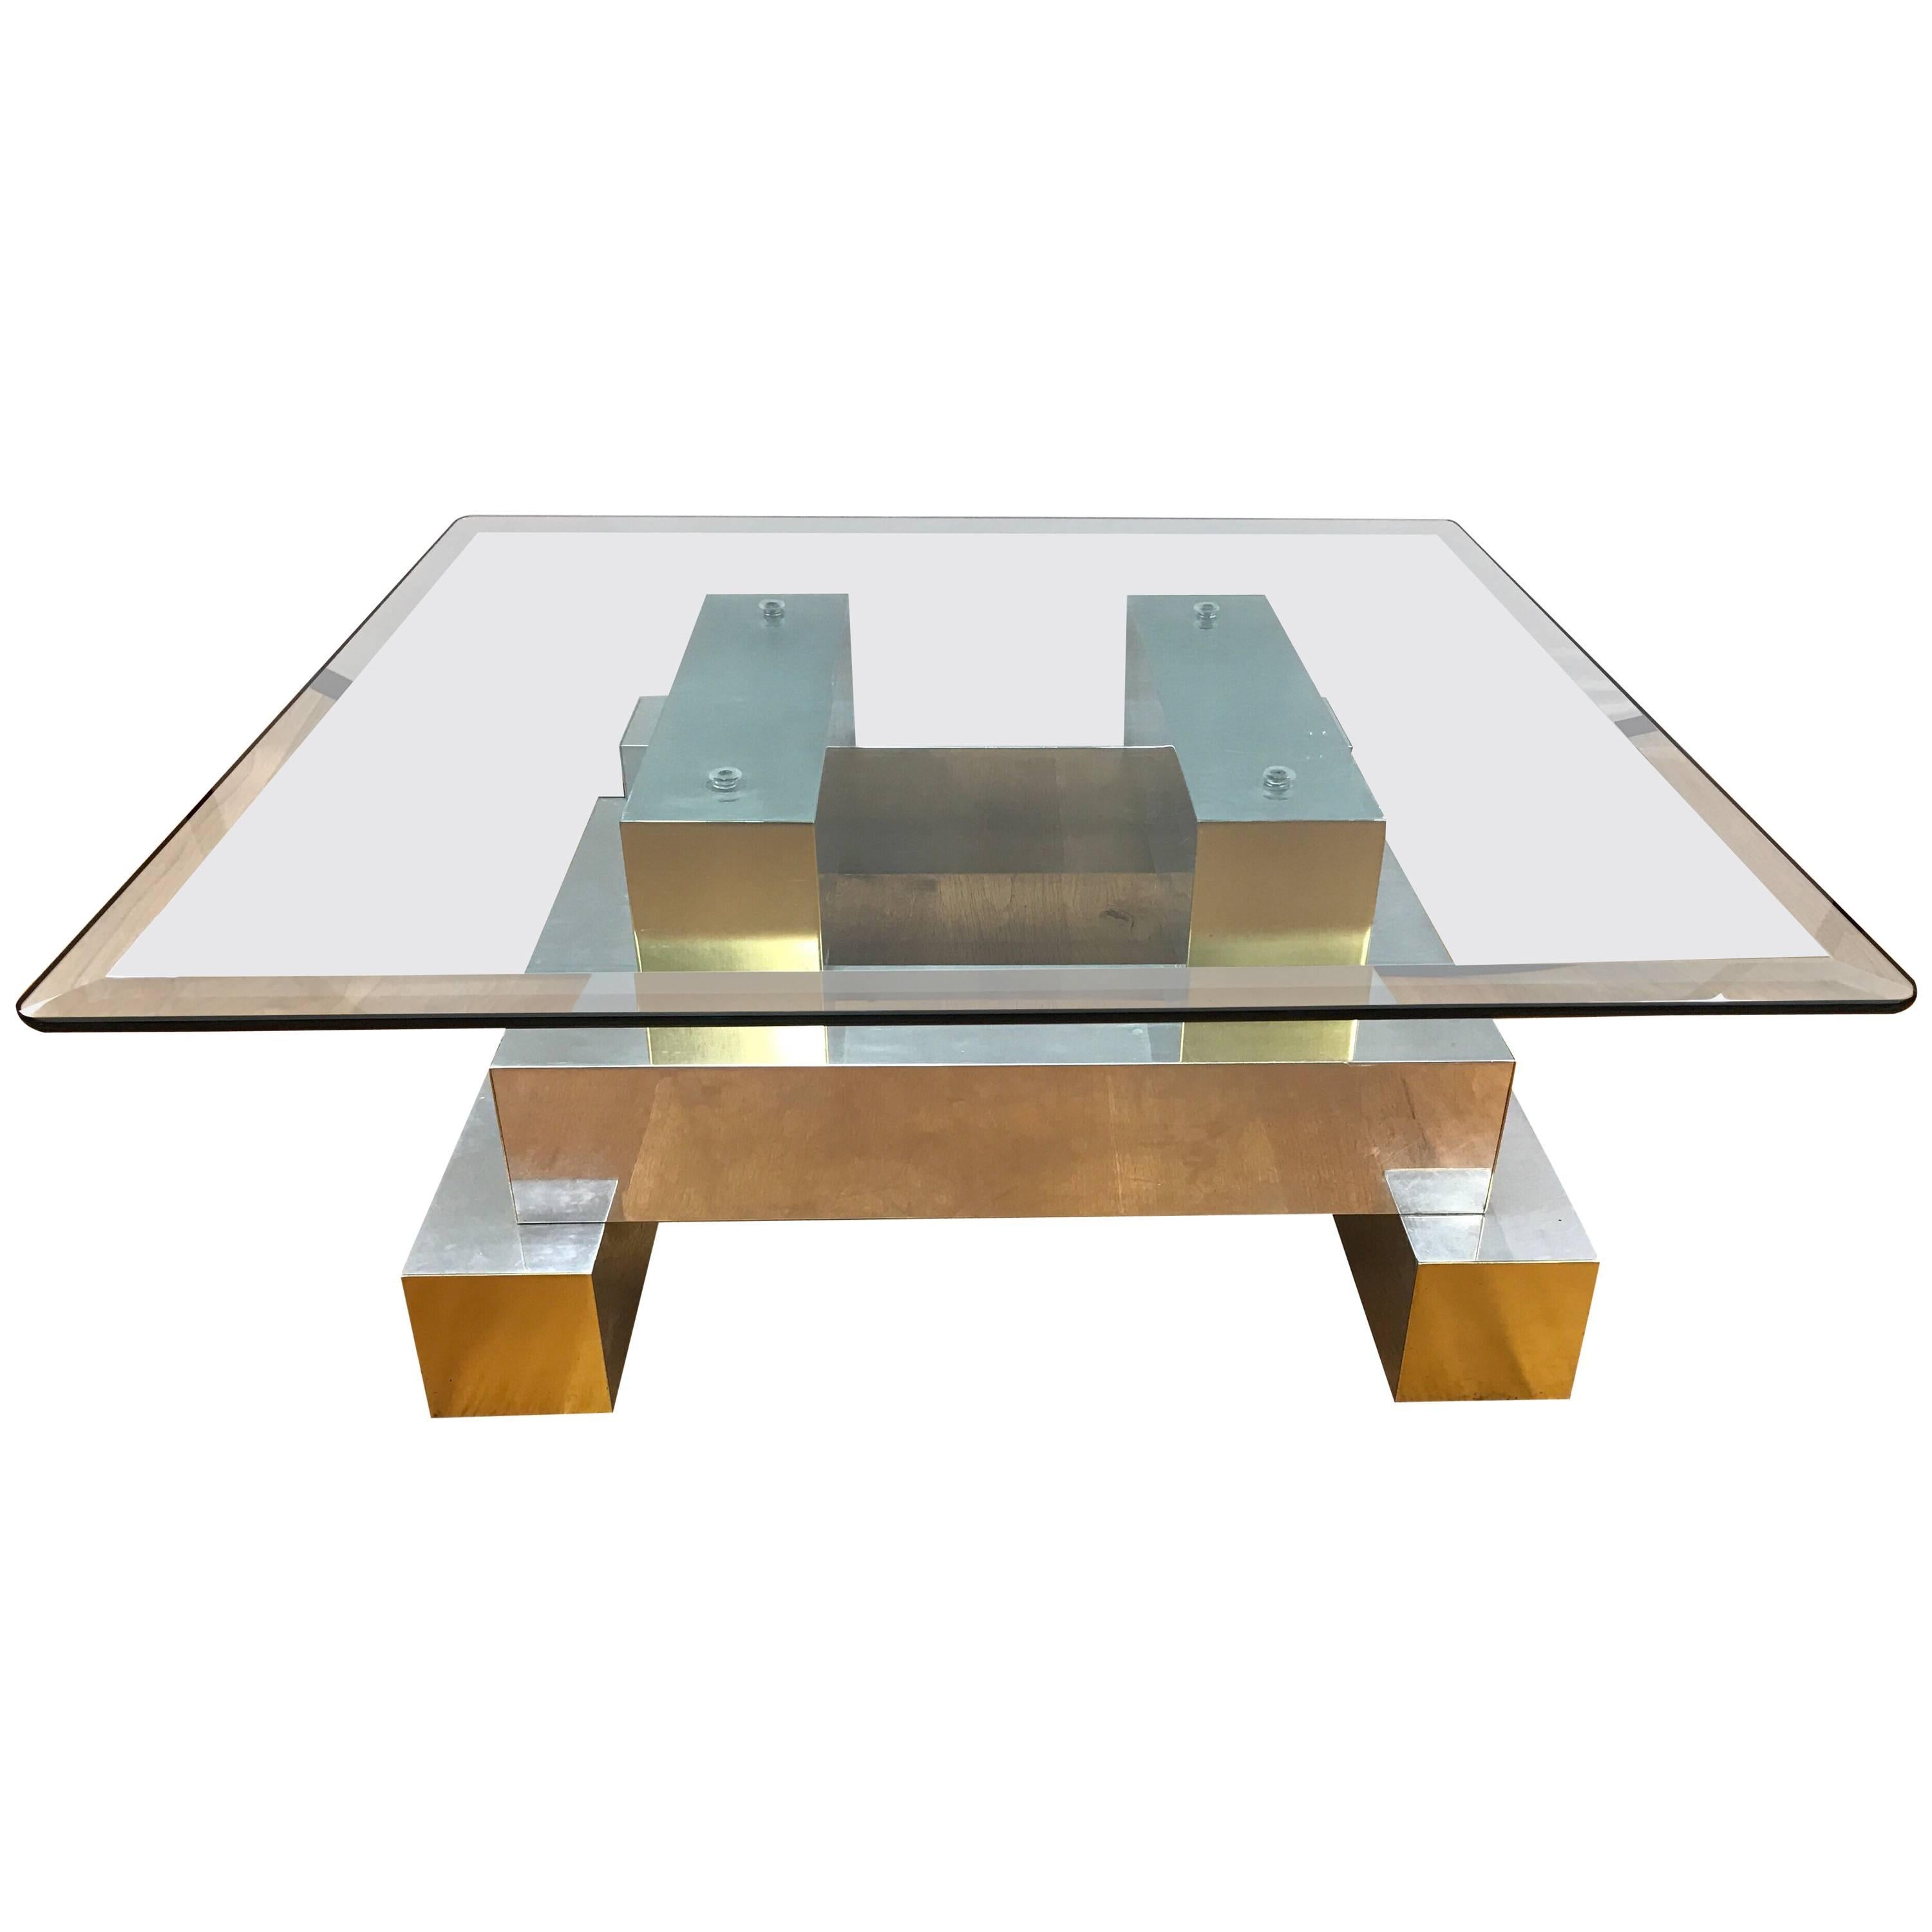 Paul Evans Cityscape Cocktail Coffee Table 1970s Mid-Century Modern Brutalist